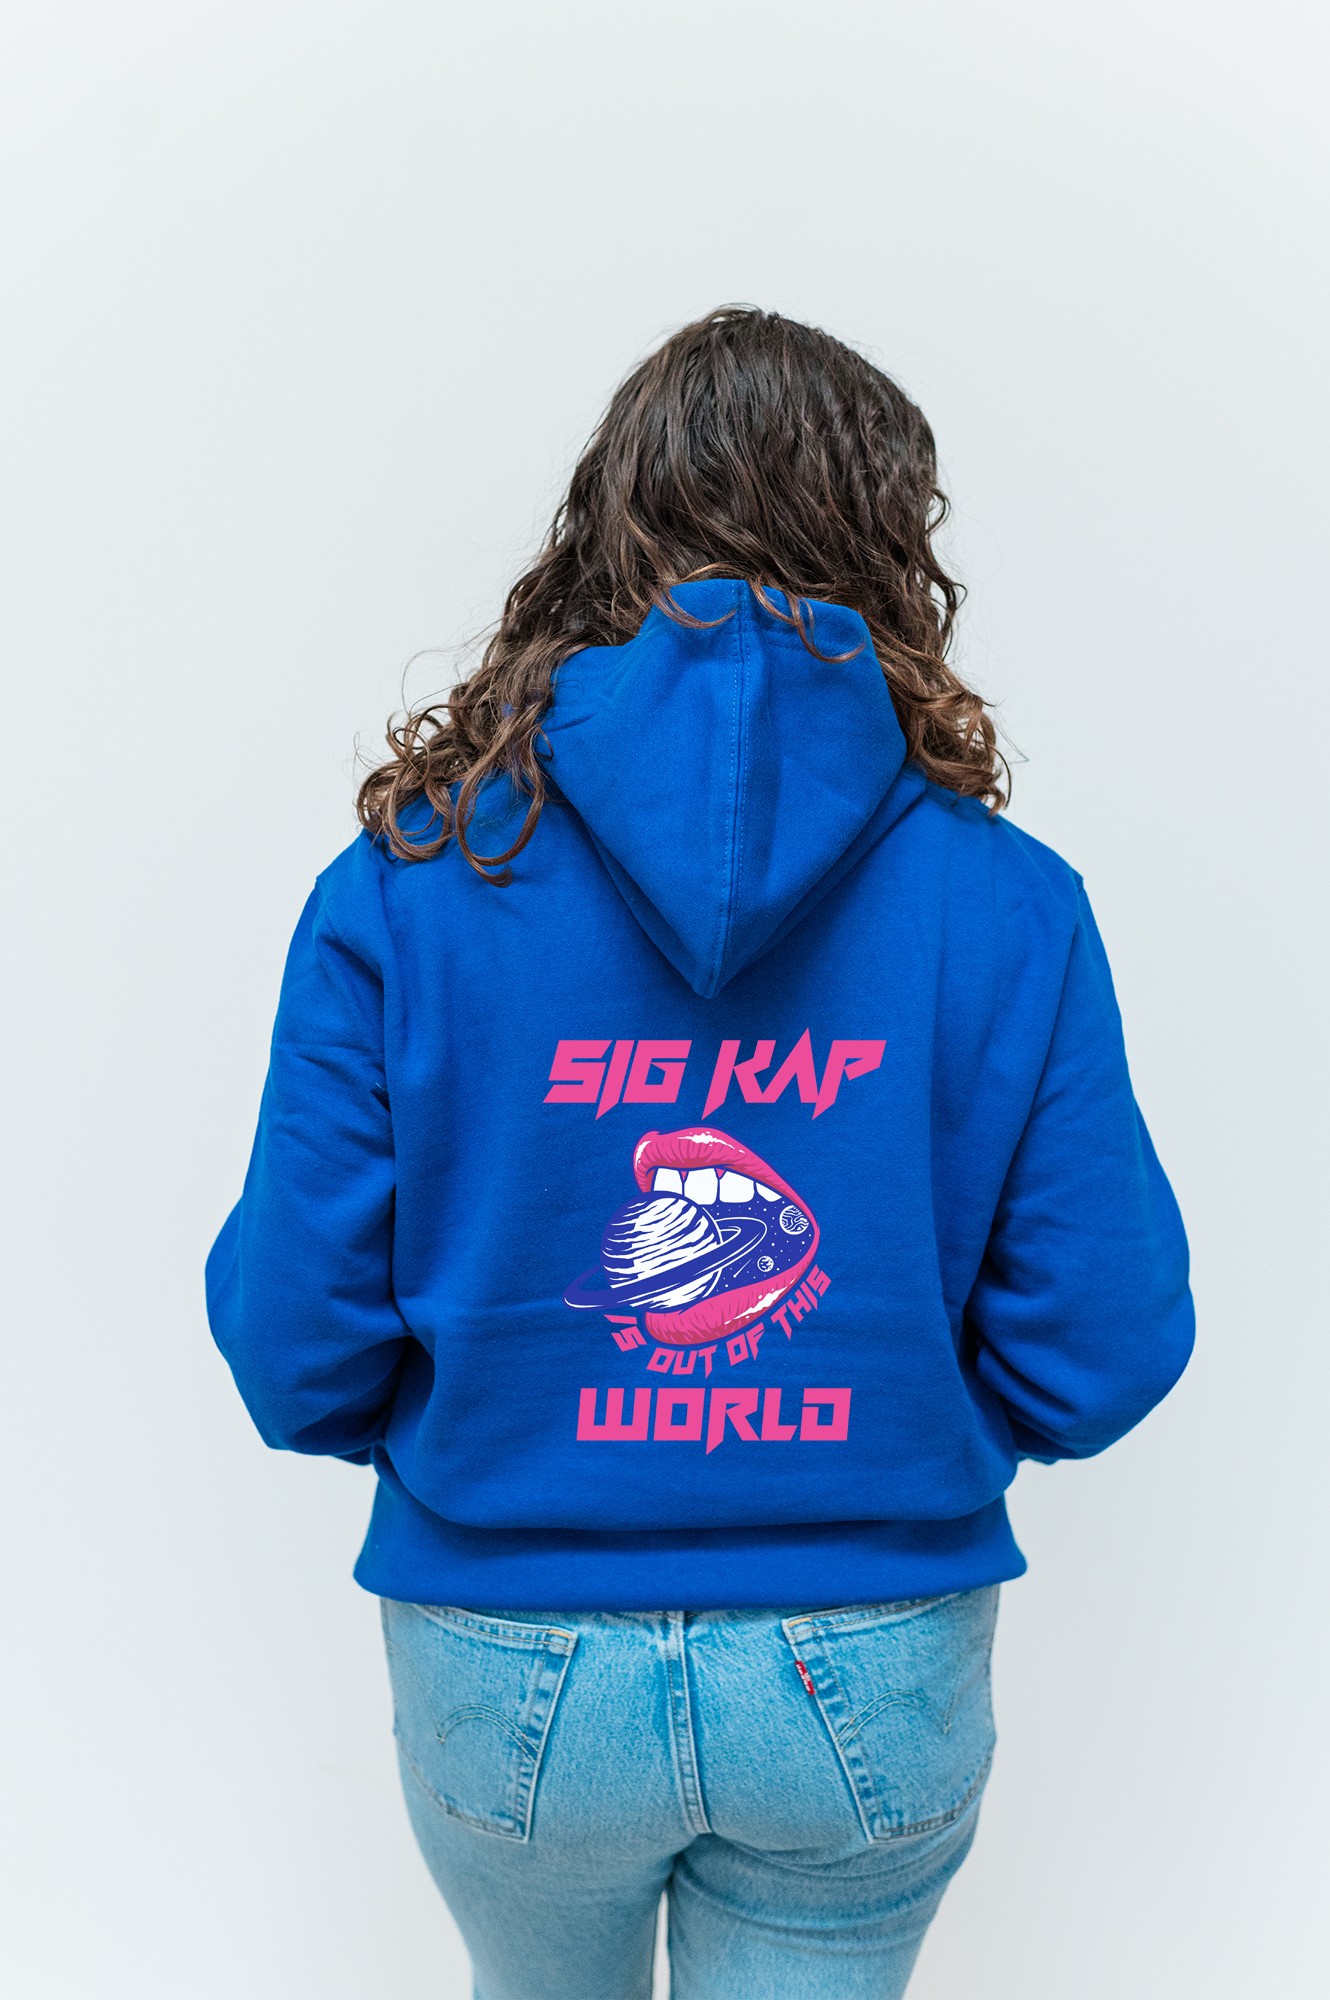 a woman wearing a blue hoodie with the word sup kap on it